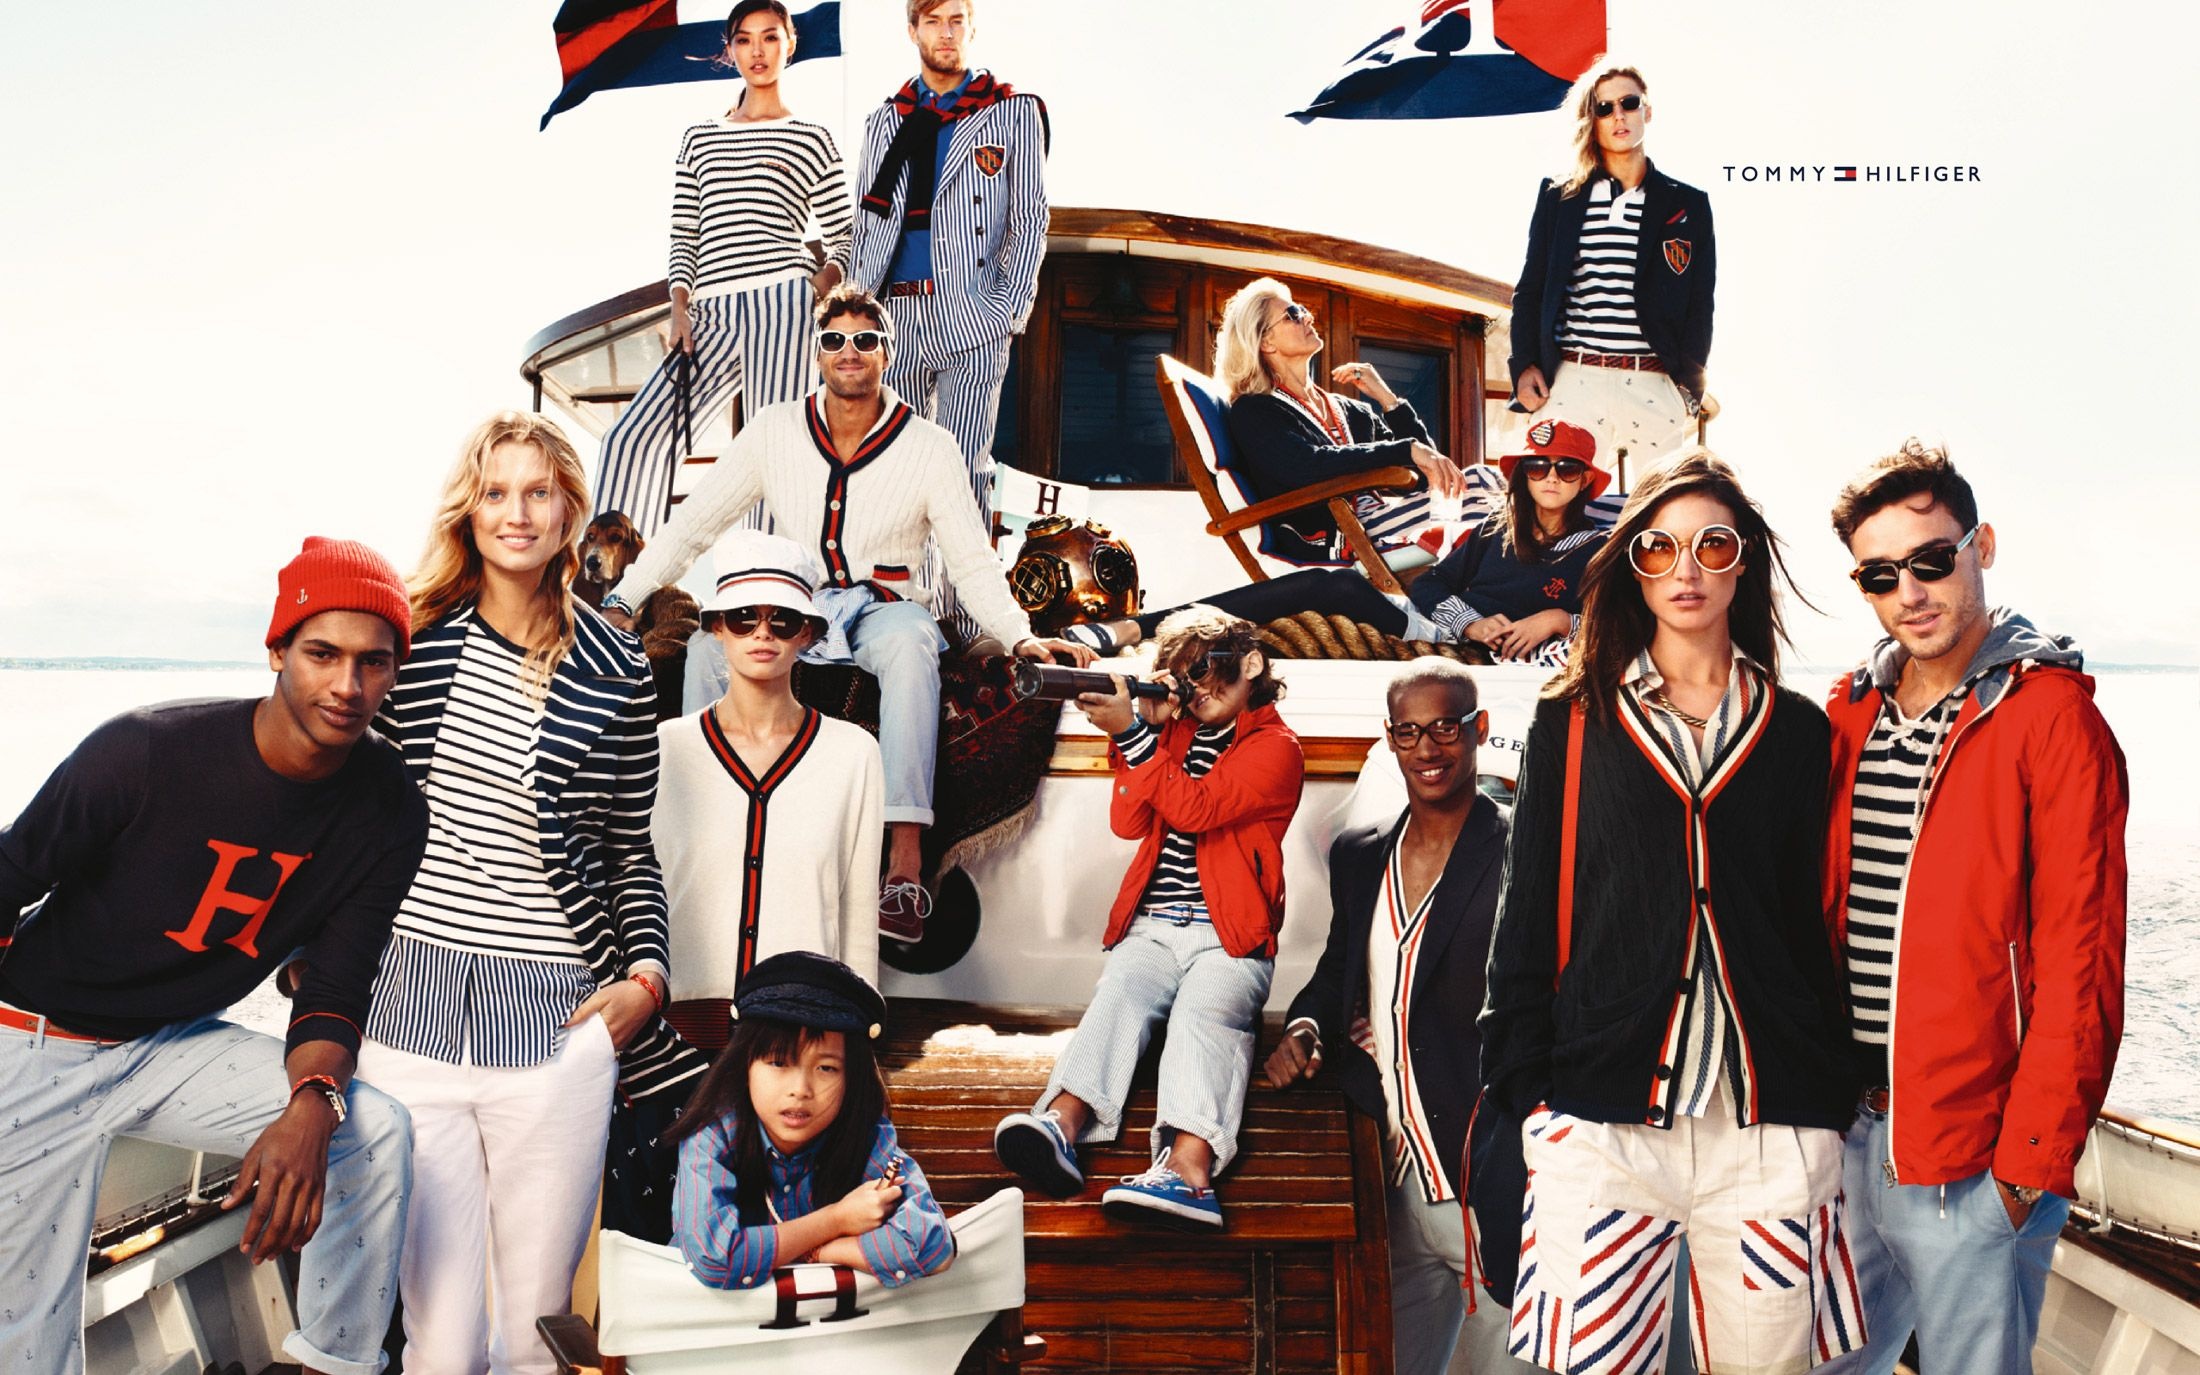 Tommy Hilfiger: The line of clothing debuted in the fall of 1985, PVH Corp. 2200x1380 HD Wallpaper.